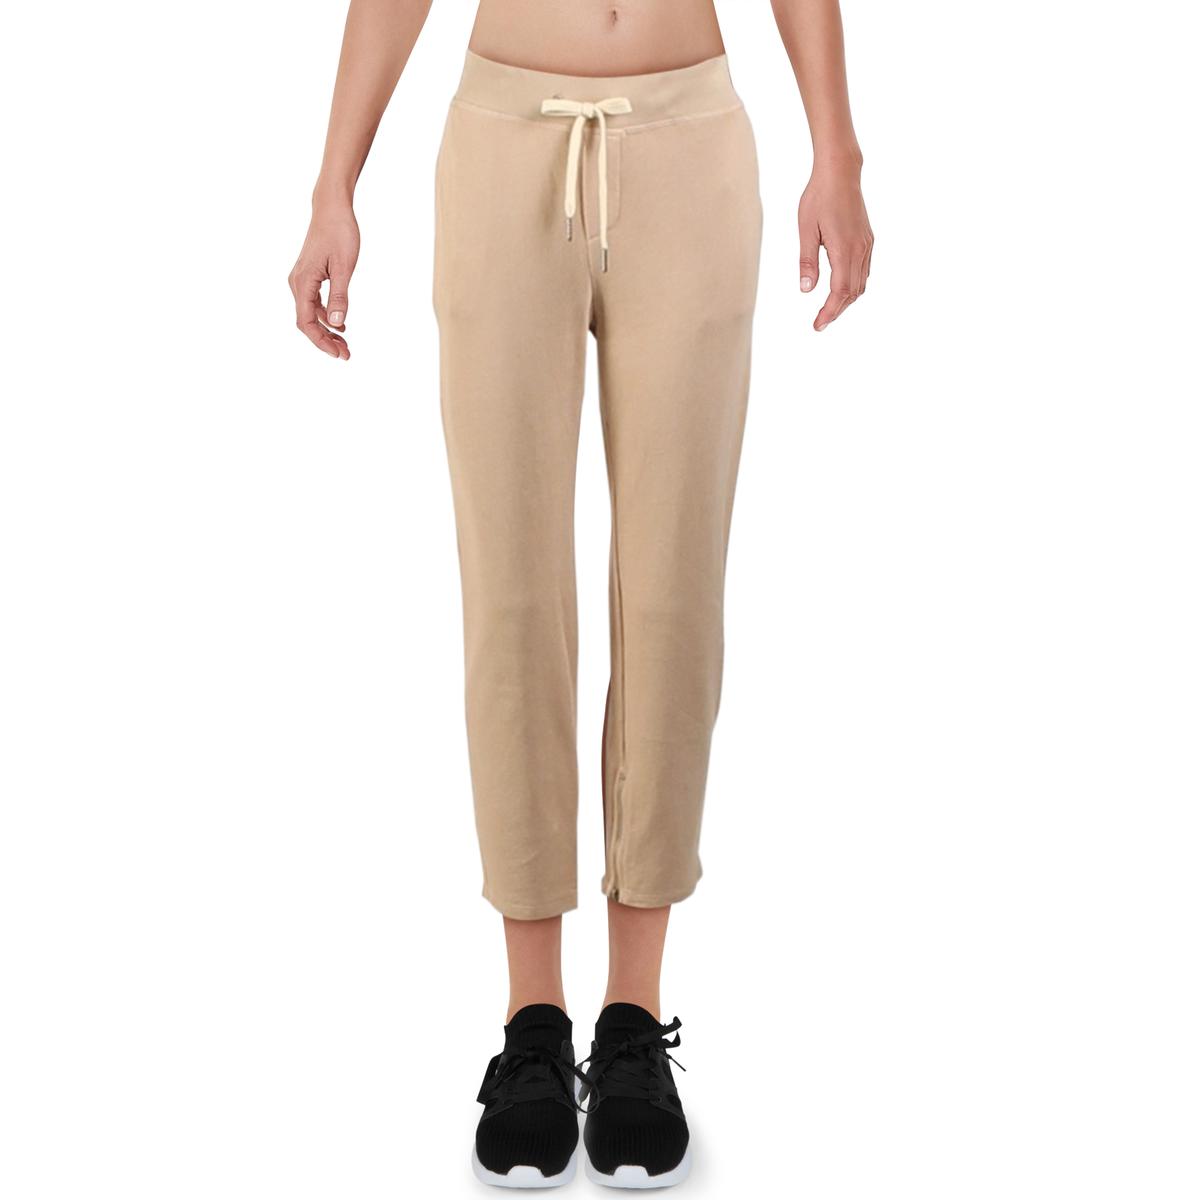 Philanthropy Womens Bailey Tan Fitness Running Jogger Pants Athletic S